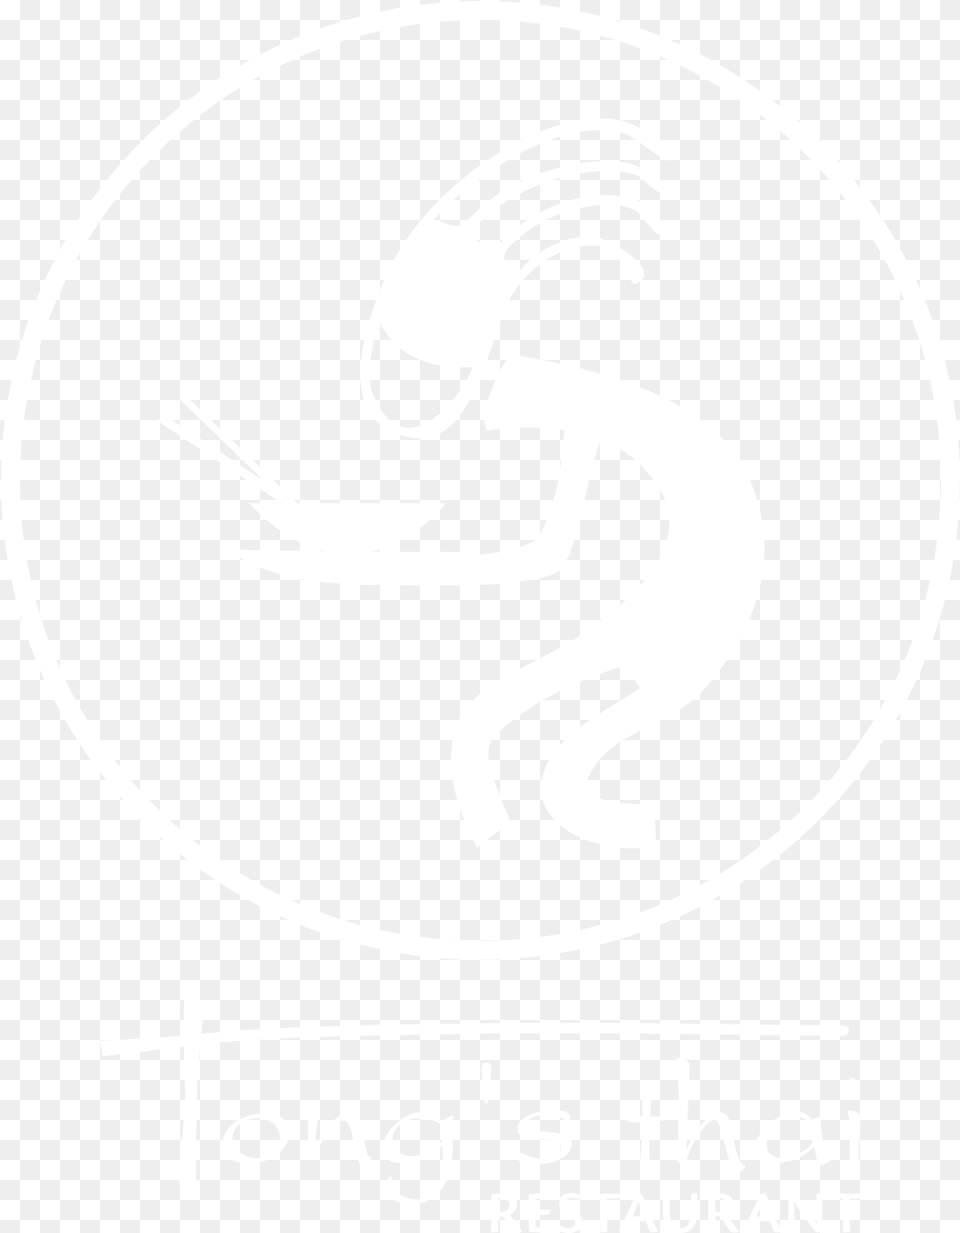 Transparent Person Eating Graphic Design, Logo, Stencil, Disk, Cutlery Png Image